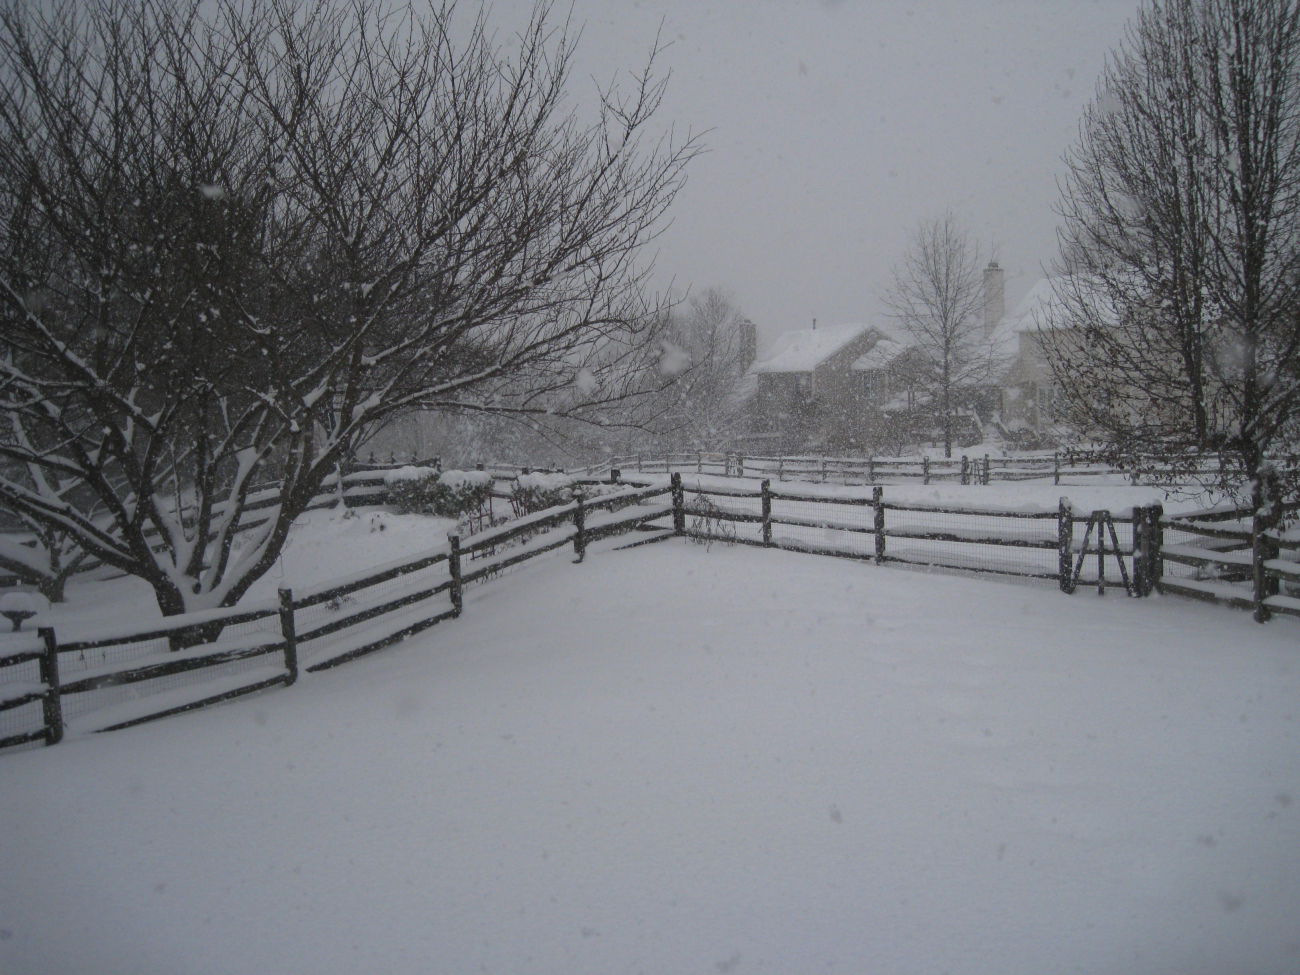 Over a foot of snow had fallen up to this time during the first greatMid-Atlantic snowstorm of the 2009/2010 winter season